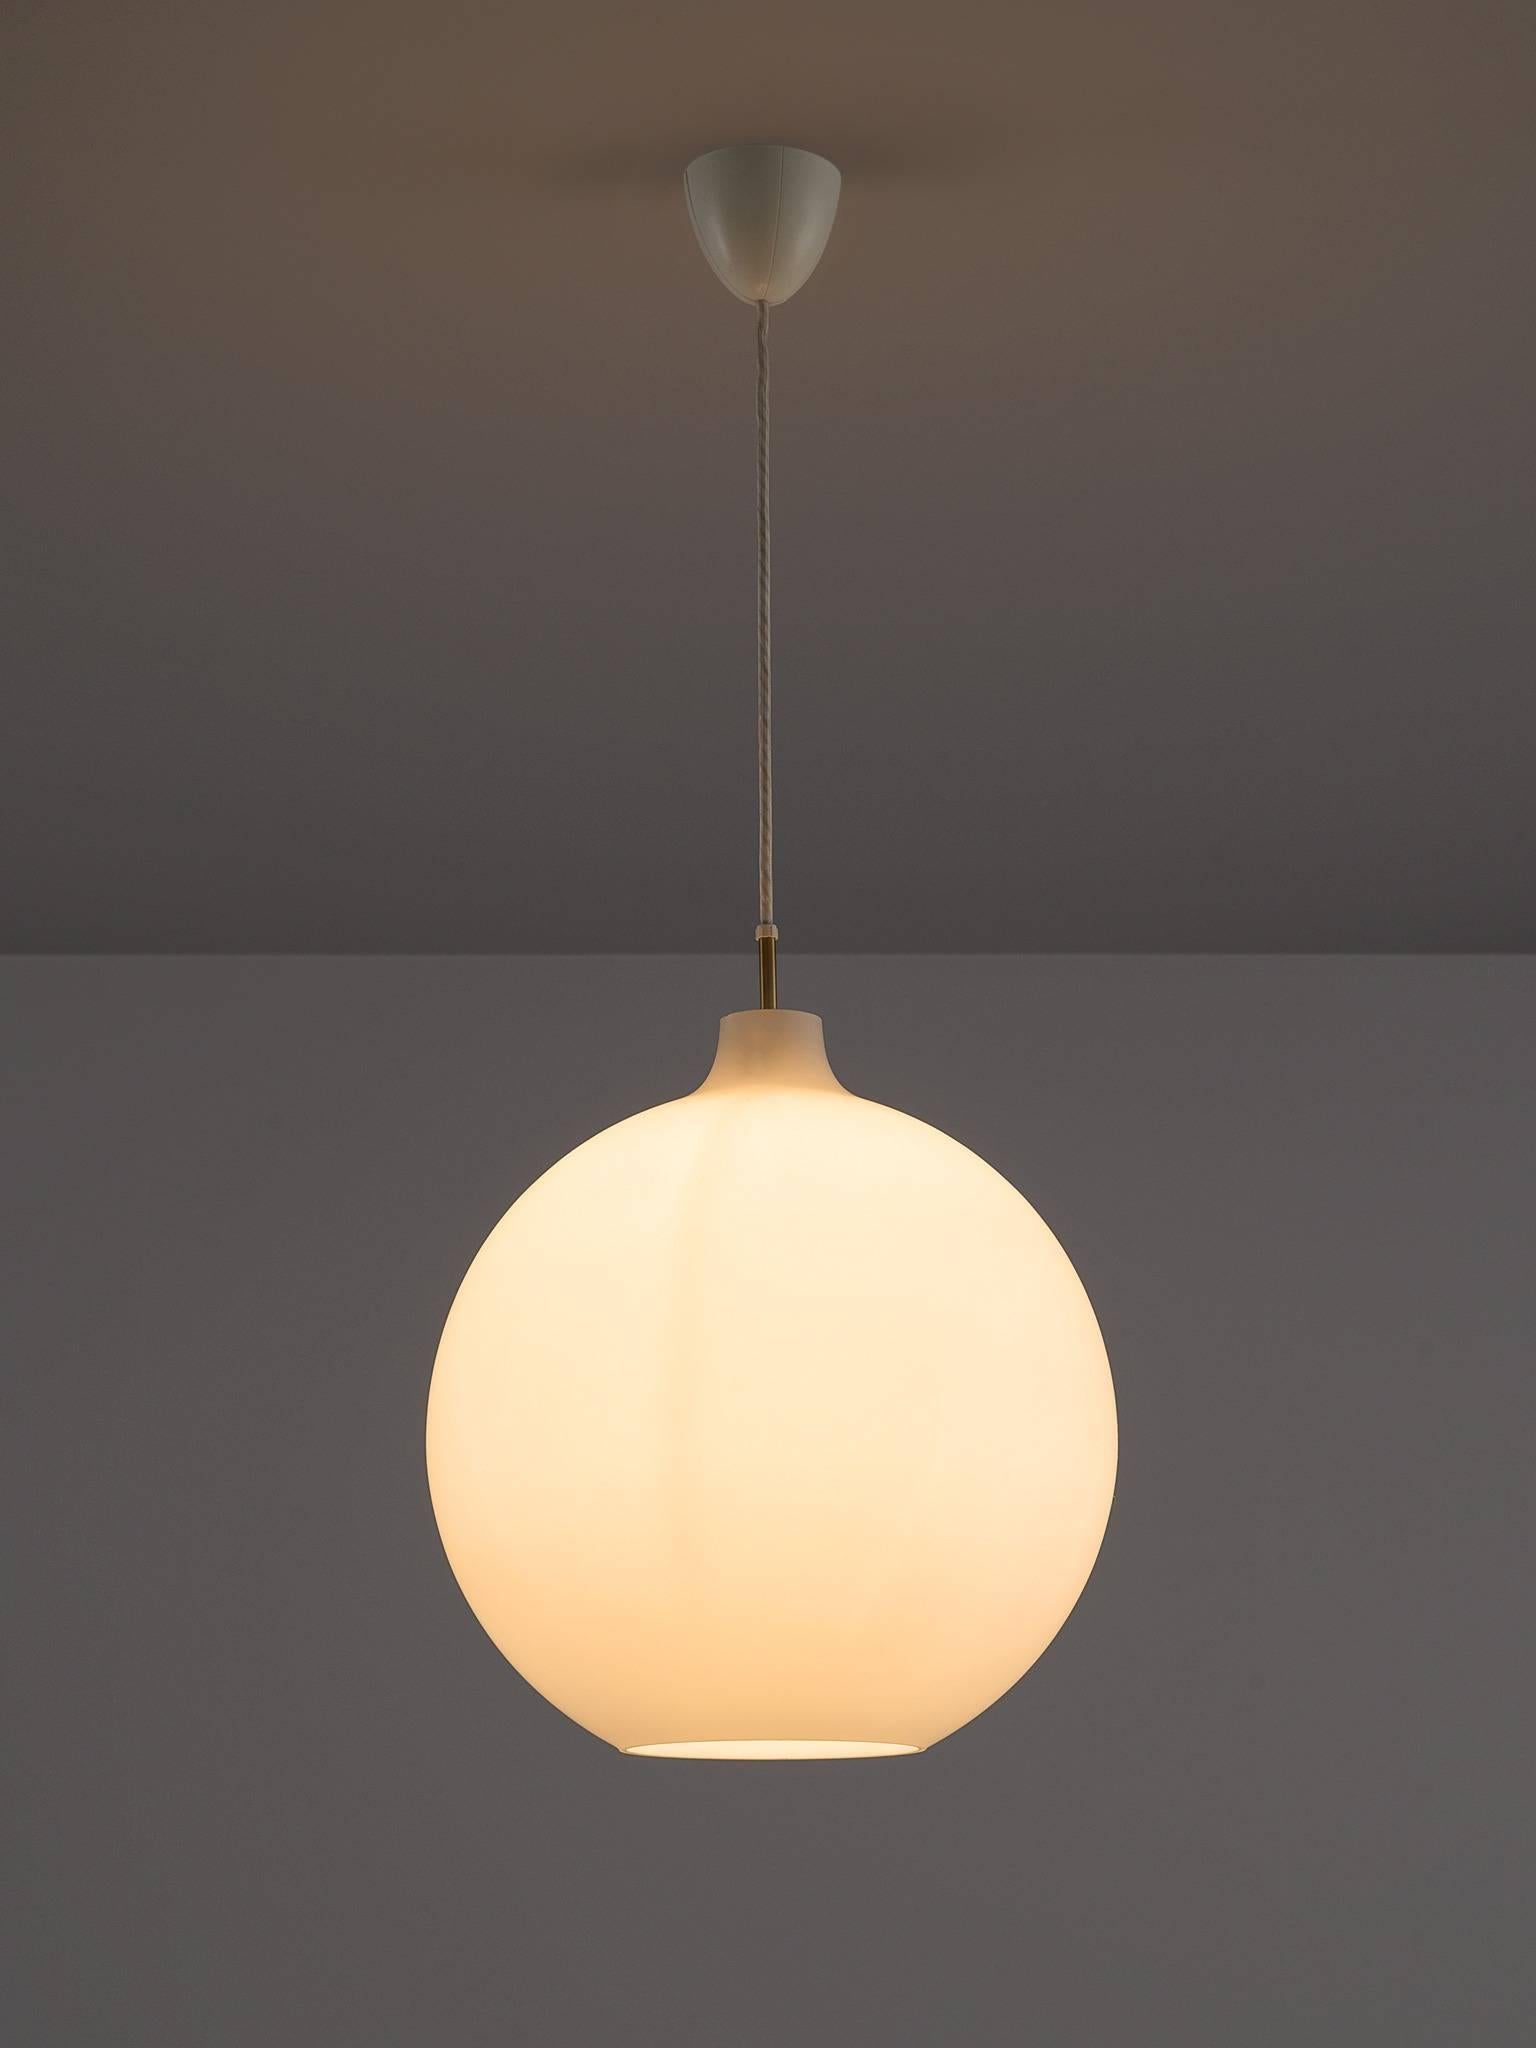 Vilhelm Wohlert for Louis Poulsen, 'Satellit' pendant, opaline glass, brass, Denmark, 1959.

This simplistic, large frosted glass pendant has a minimalist, modest aesthetic. The globe is finished with a brass fitting. The lamp is open at the